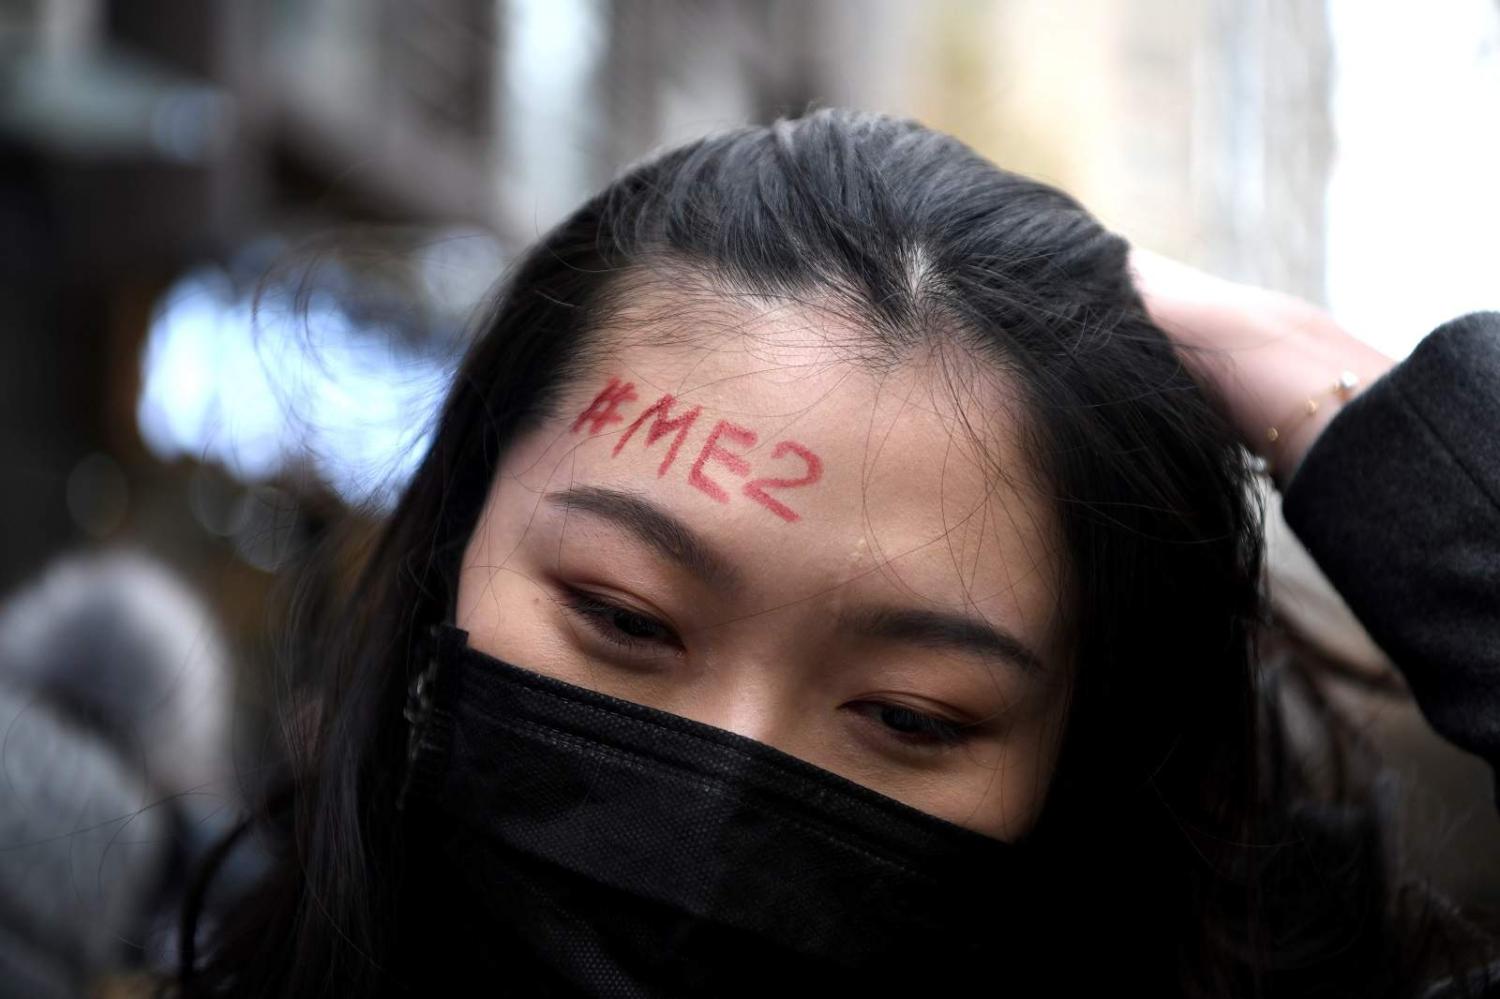 A supporter of feminist figure Zhou Xiaoxuan outside Haidian District People’s Court in Beijing, 2 December 2020 (Noel Celis/AFP via Getty Images)